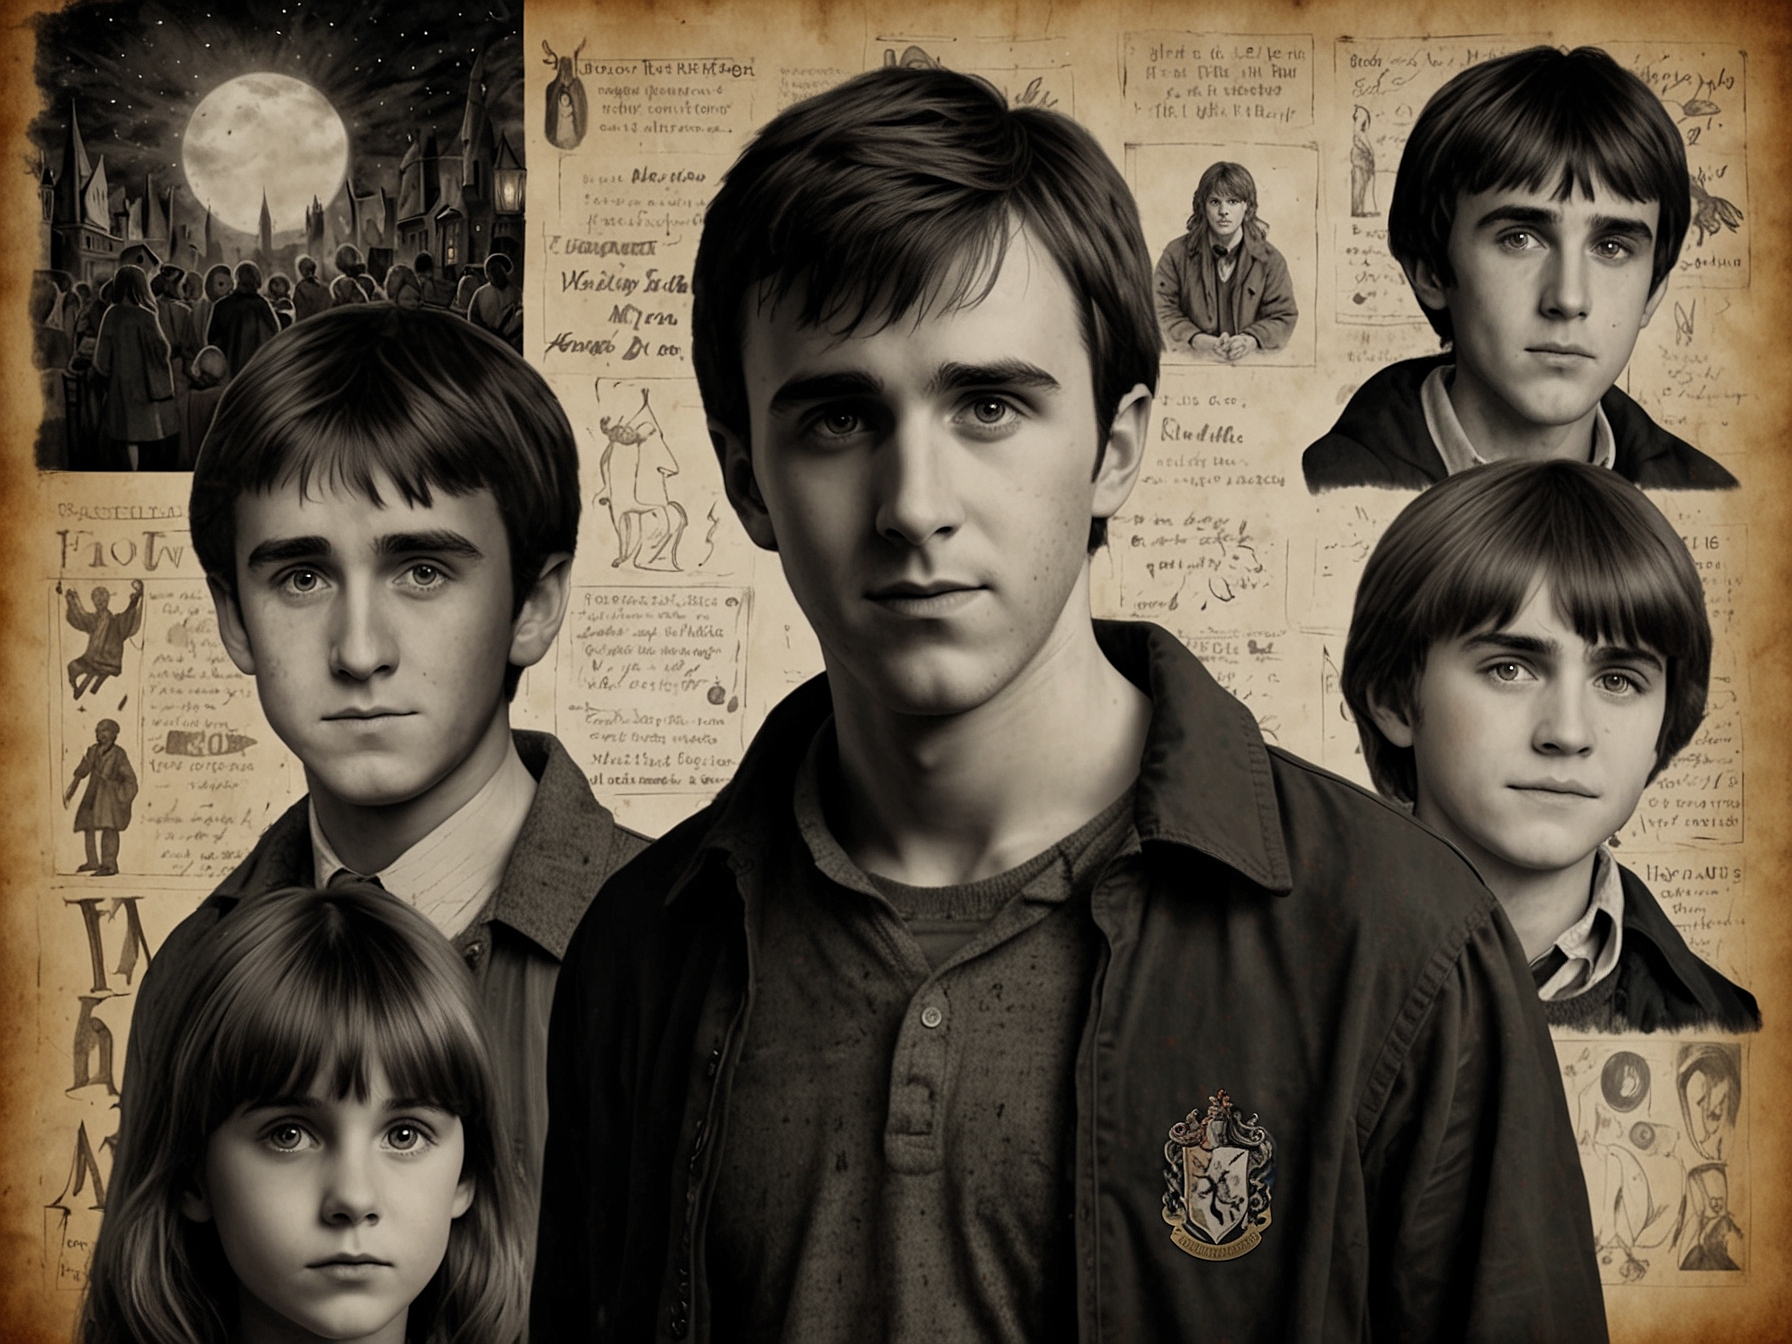 A nostalgic collage of Matthew Lewis as Neville Longbottom through various 'Harry Potter' films, capturing his transformation from a timid child to a courageous hero, emphasizing his impact on fans.